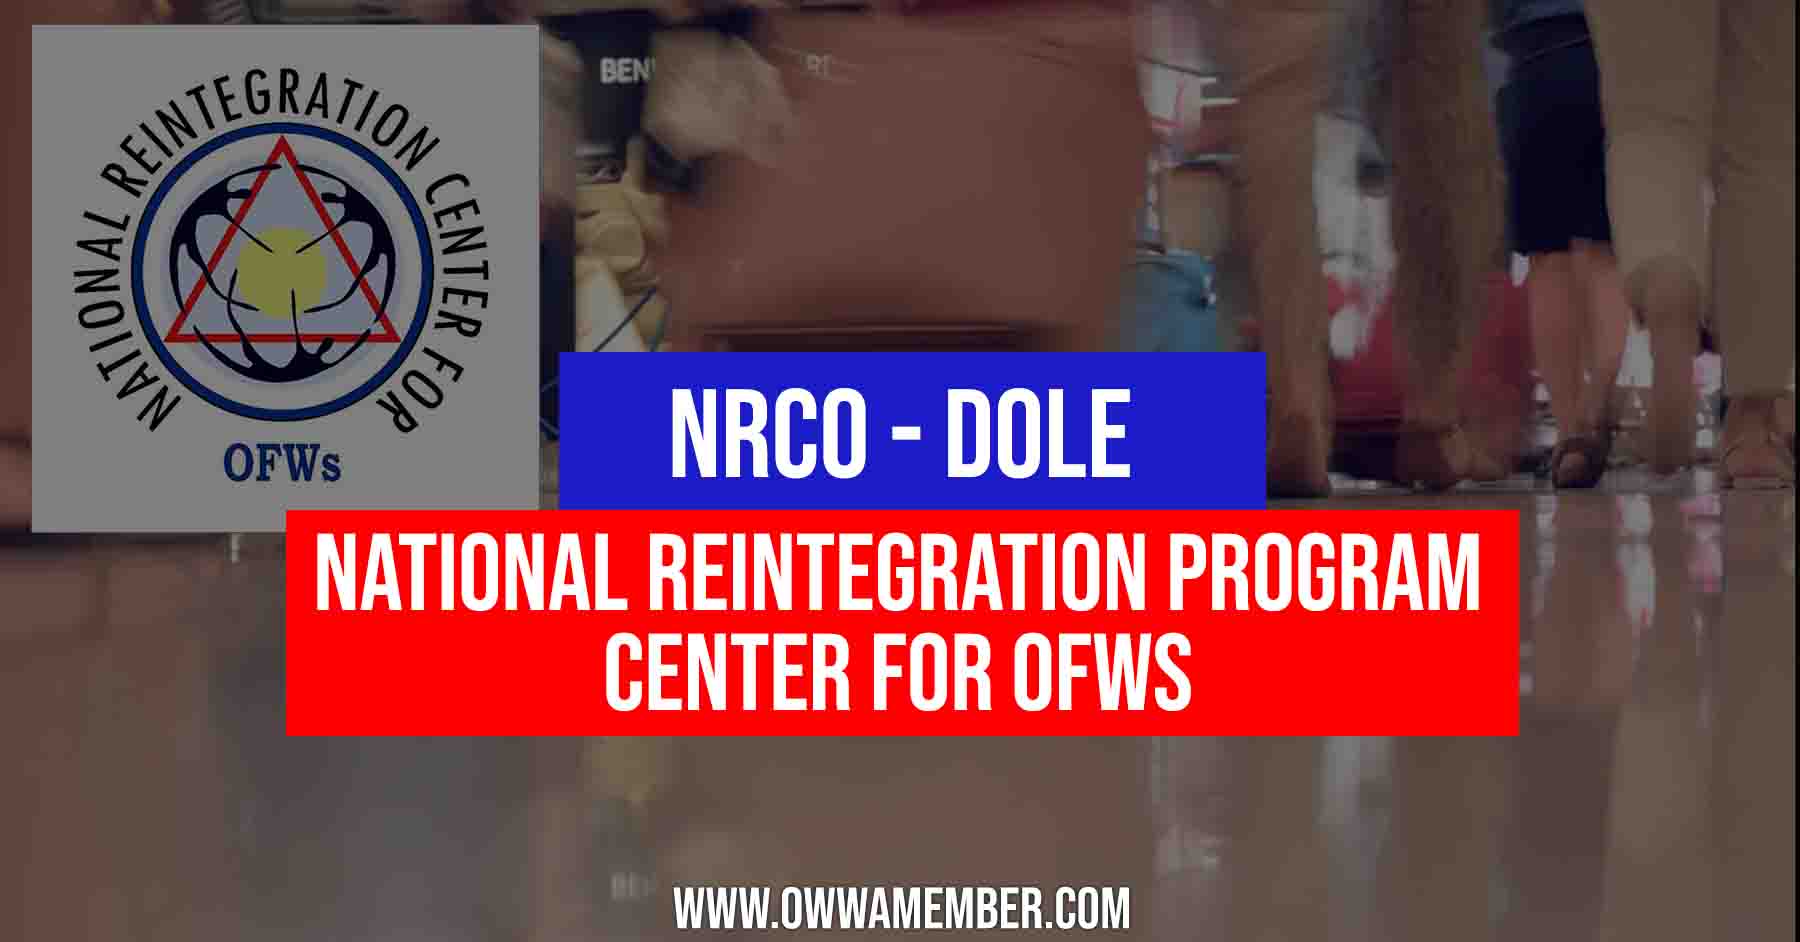 what is the purpose of nrco national reintegration center for ofws